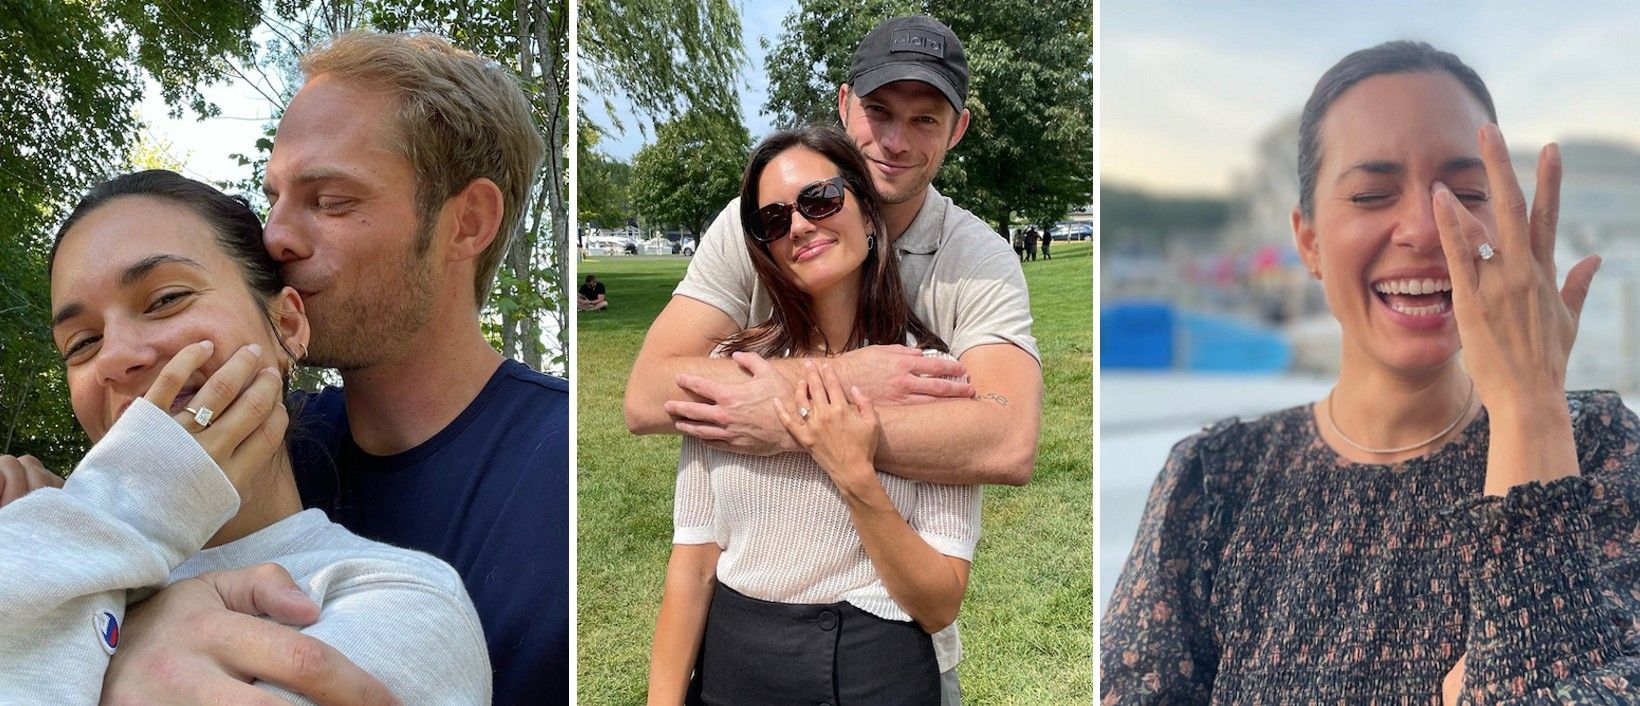 Chicago Med Star Torrey DeVitto is Engaged to Director Jared LaPine—See Her Gorgeous Ring! image1